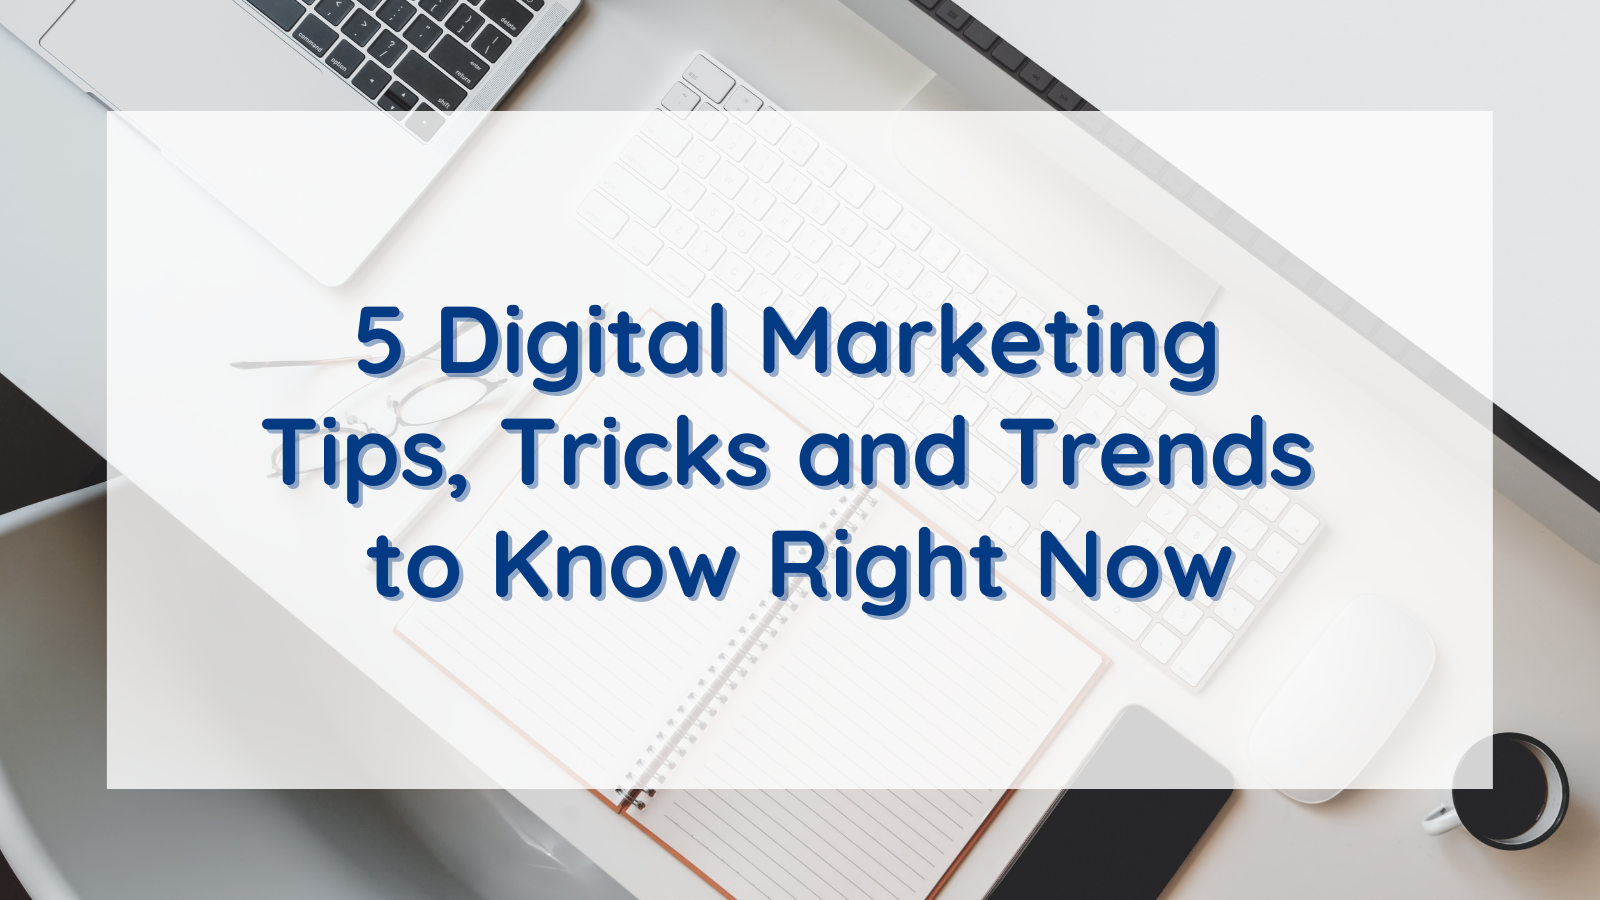 5 Digital Marketing Tips, Tricks and Trends to Know Right Now